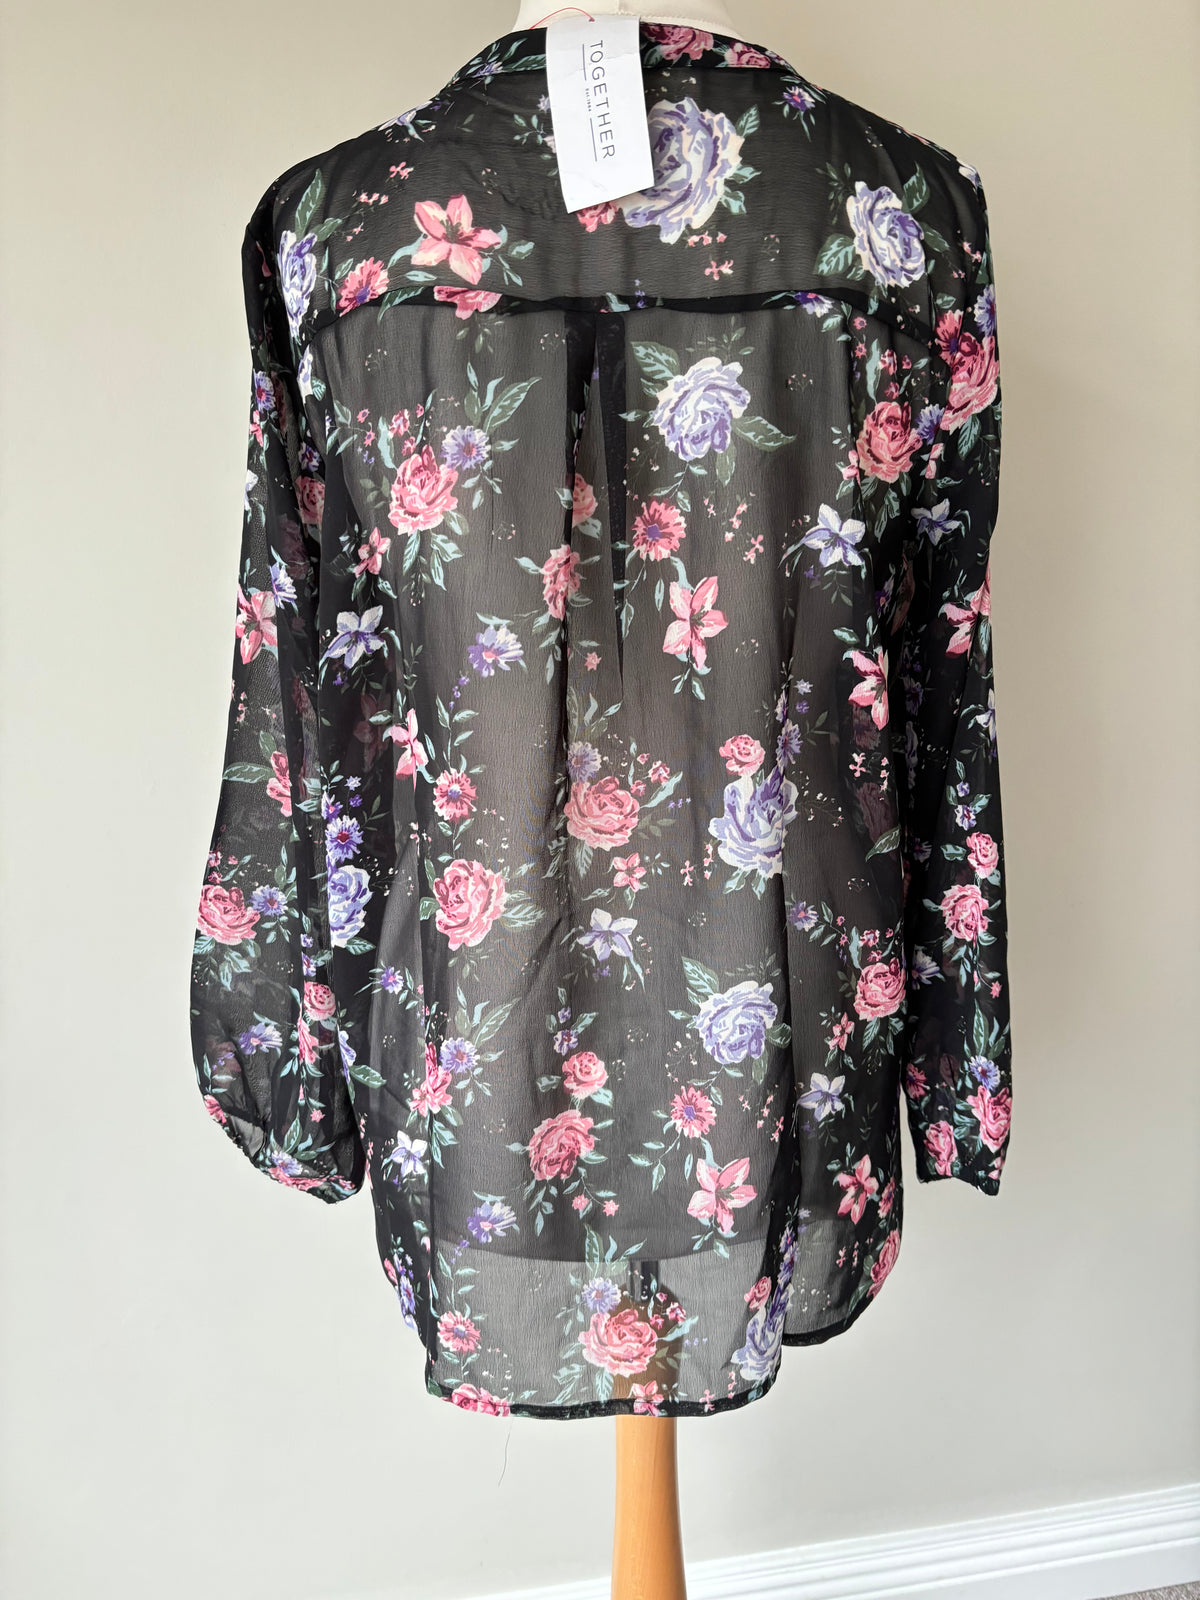 Dark Floral Chiffon Zip Pintuck Blouse by Together Size 12